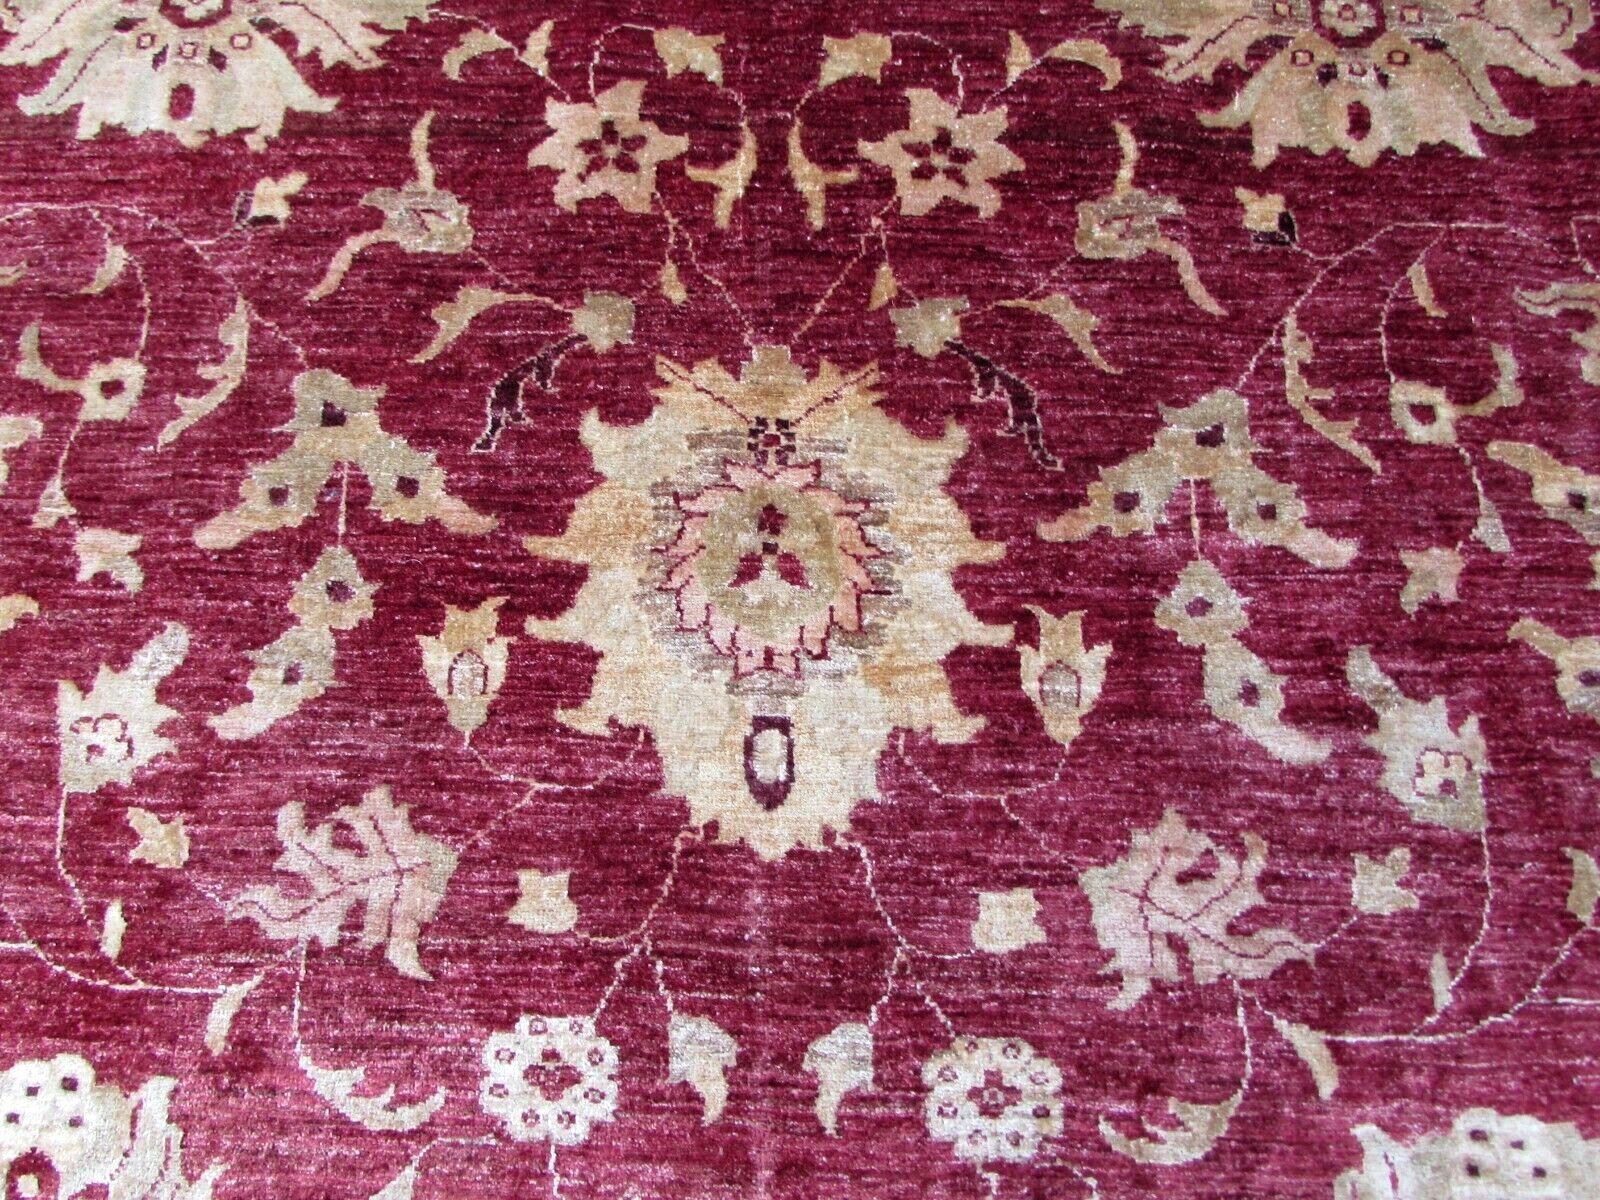 Handmade Vintage Afghan Zigler Red and Beige Rug 9.7' x 12.8', 1980s, 1Q36 In Good Condition For Sale In Bordeaux, FR